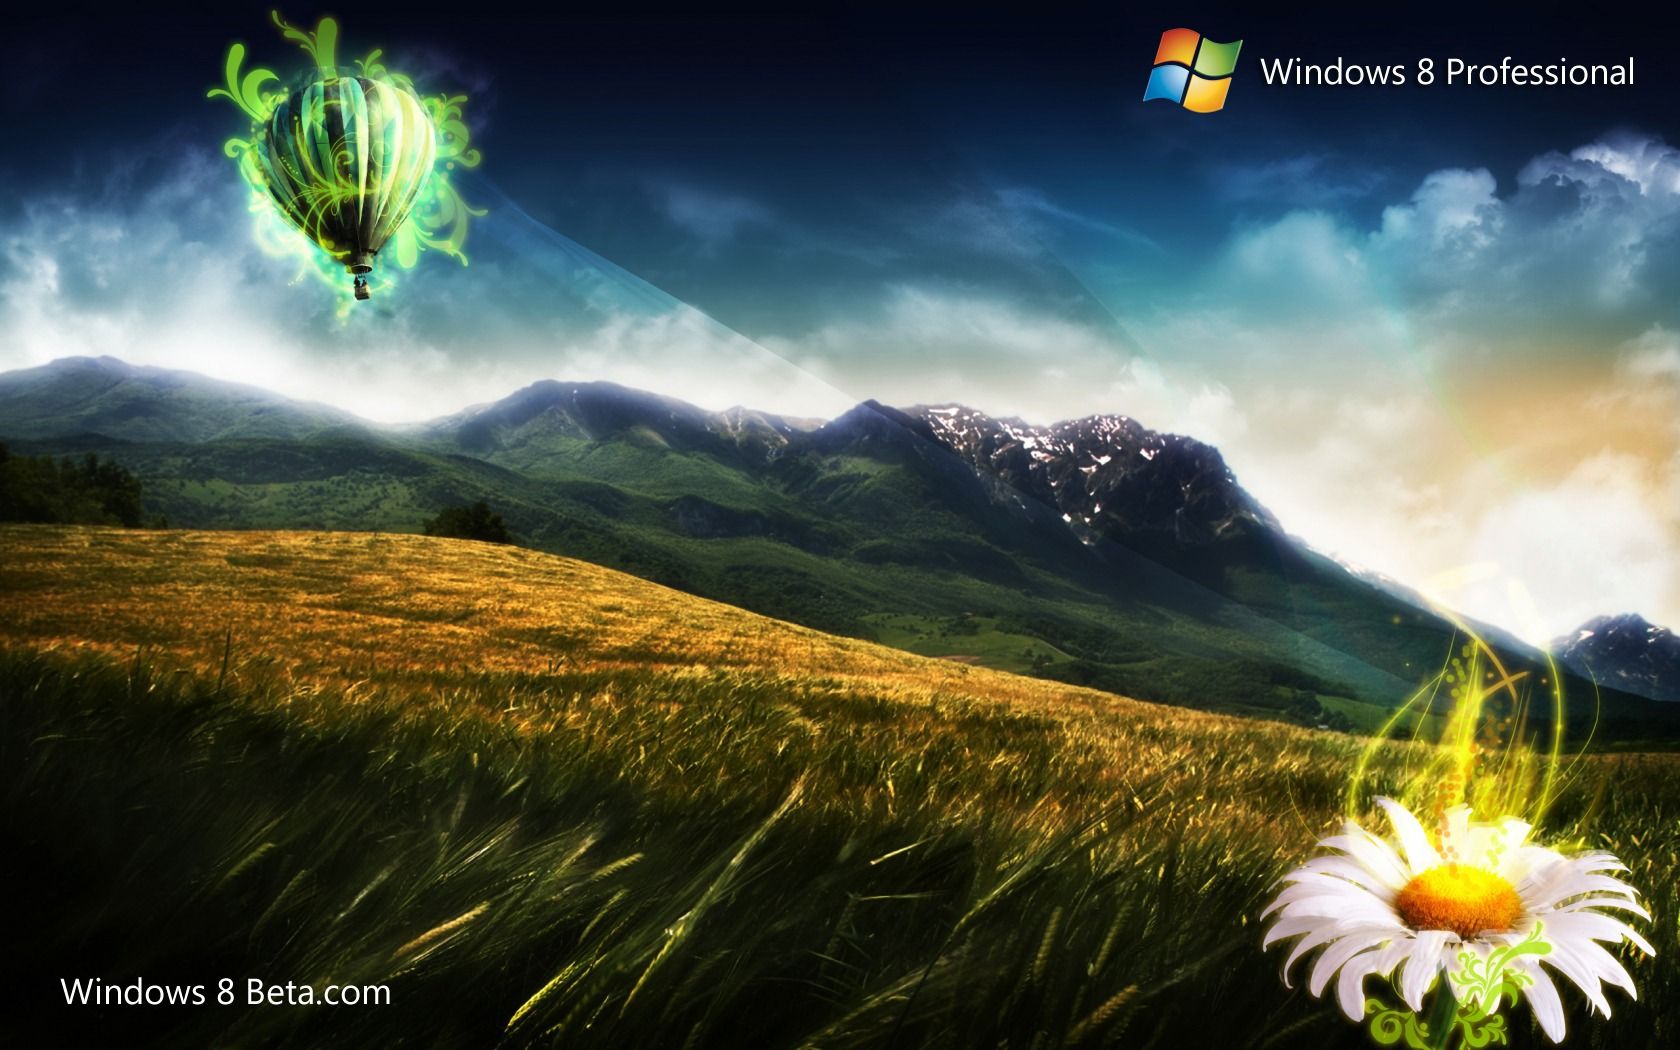 Windows 8 wallpapers Full HD Full HD Pictures